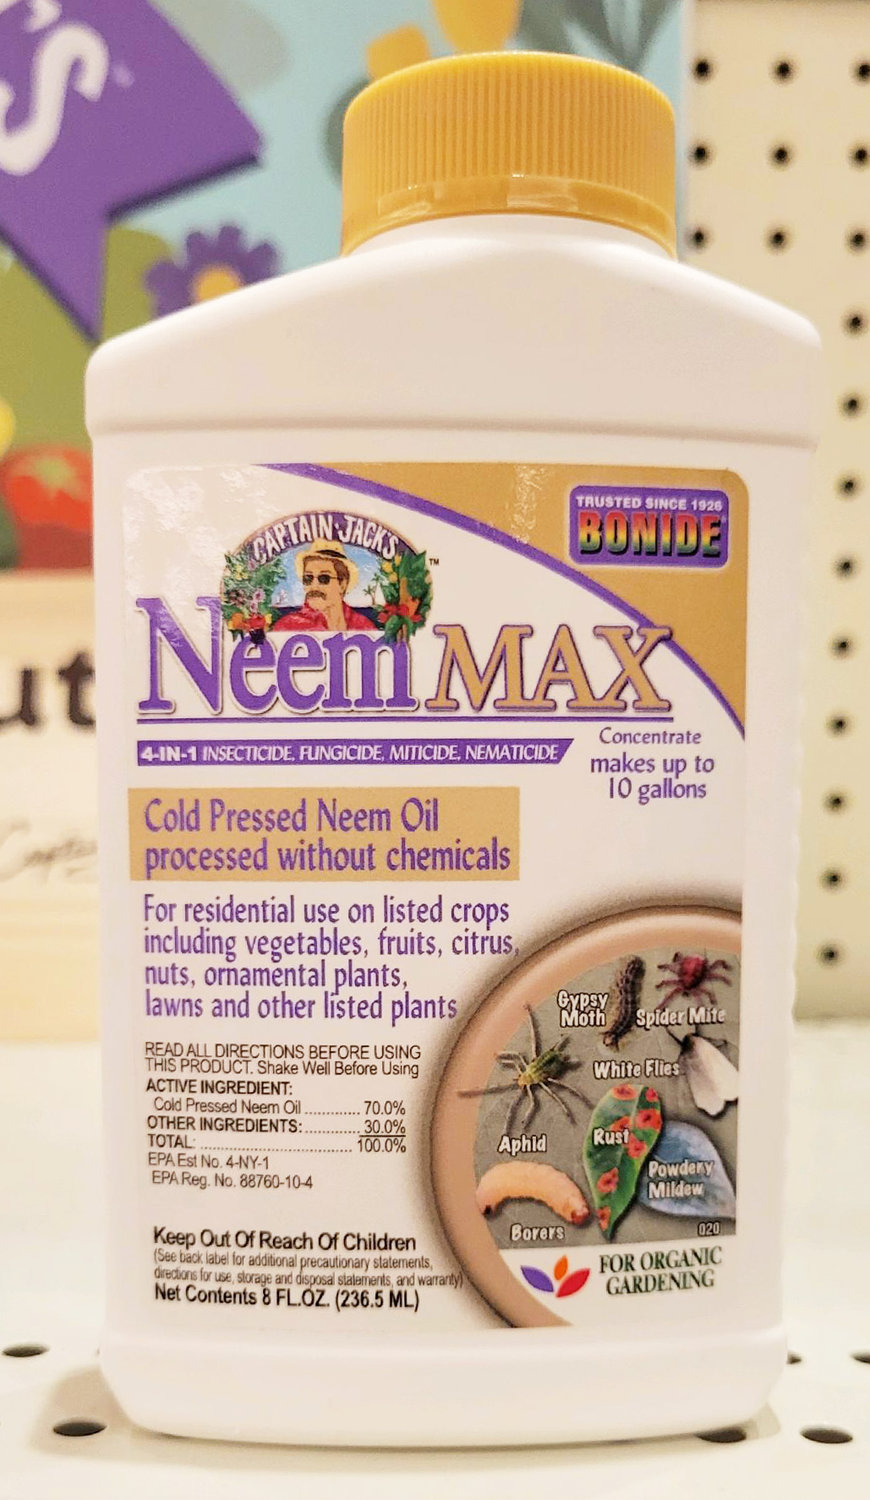 The new product NeemMax